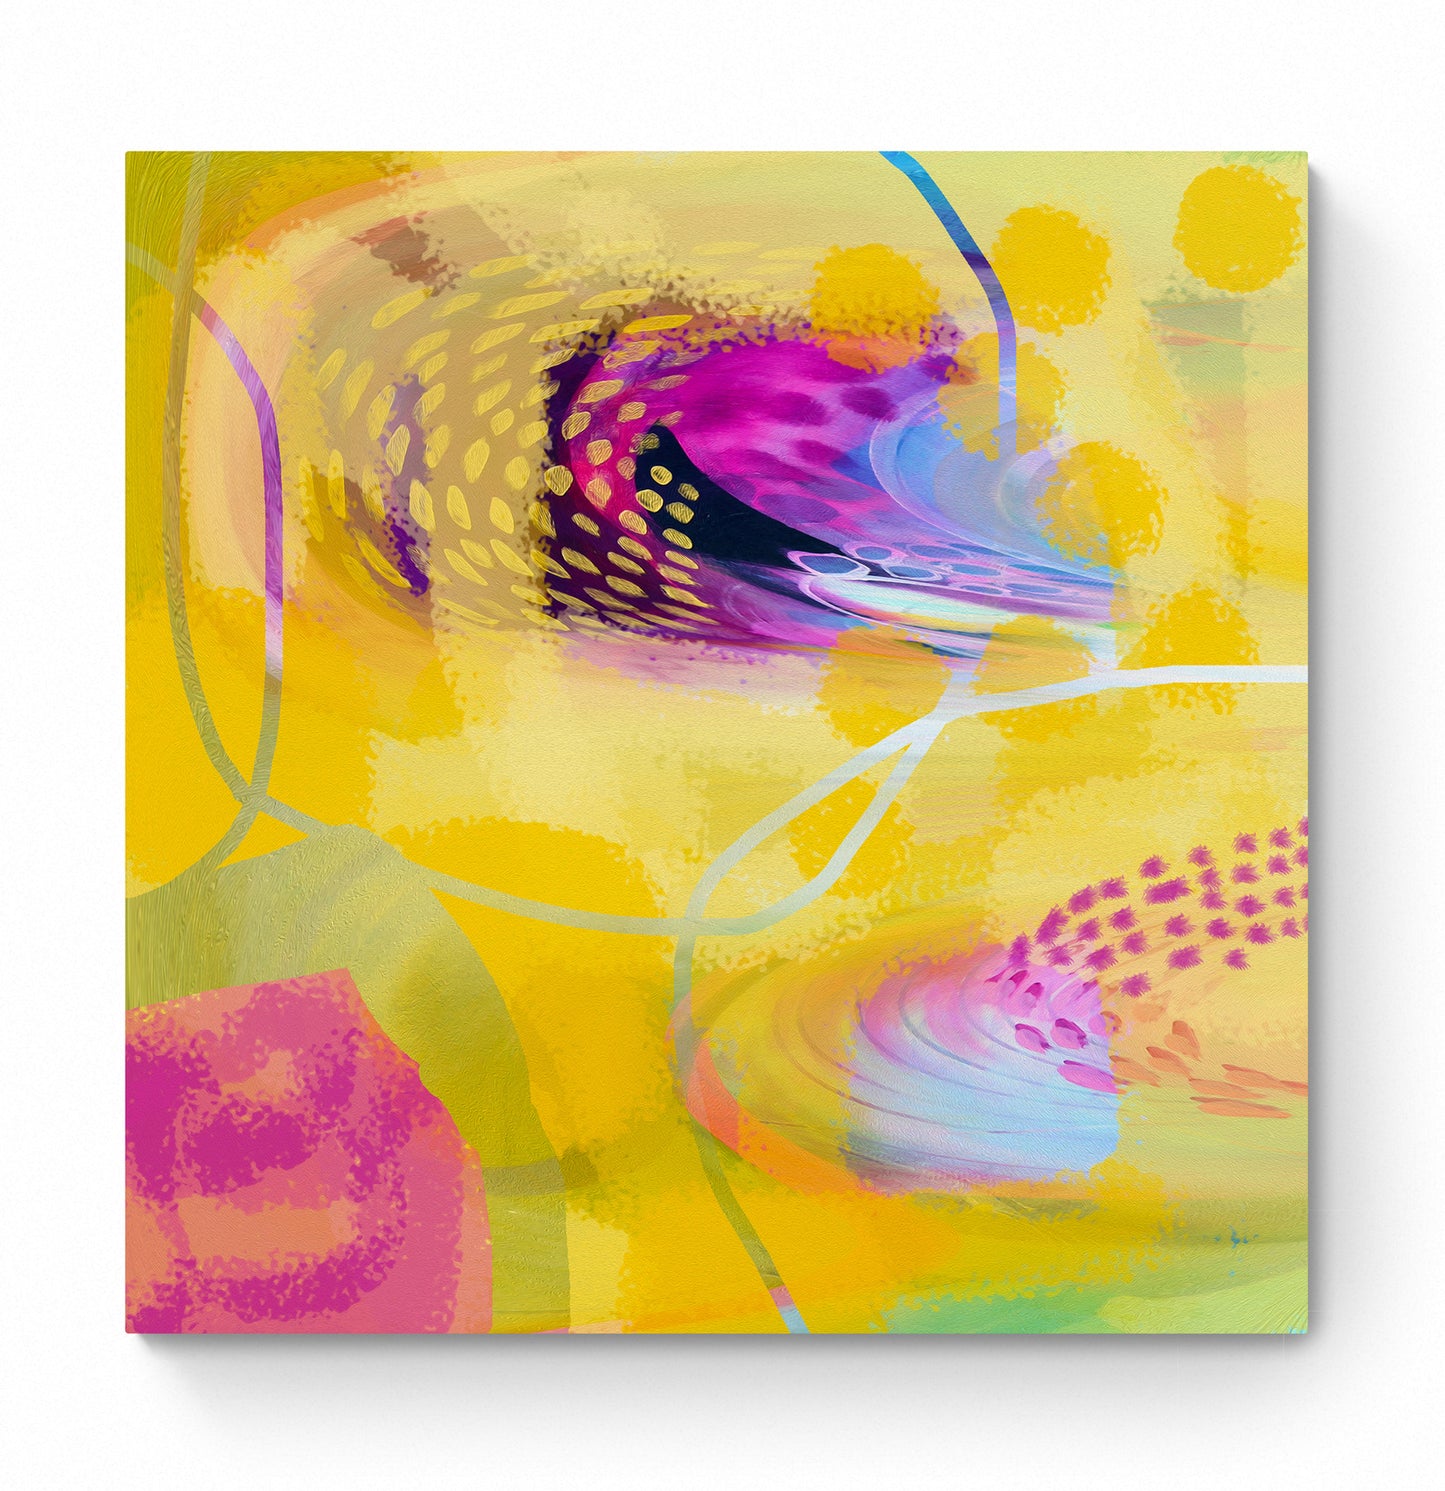 Yellow Abstract Art Giclee Print on Stretched Canvas or Fine Art Paper - Various Sizes